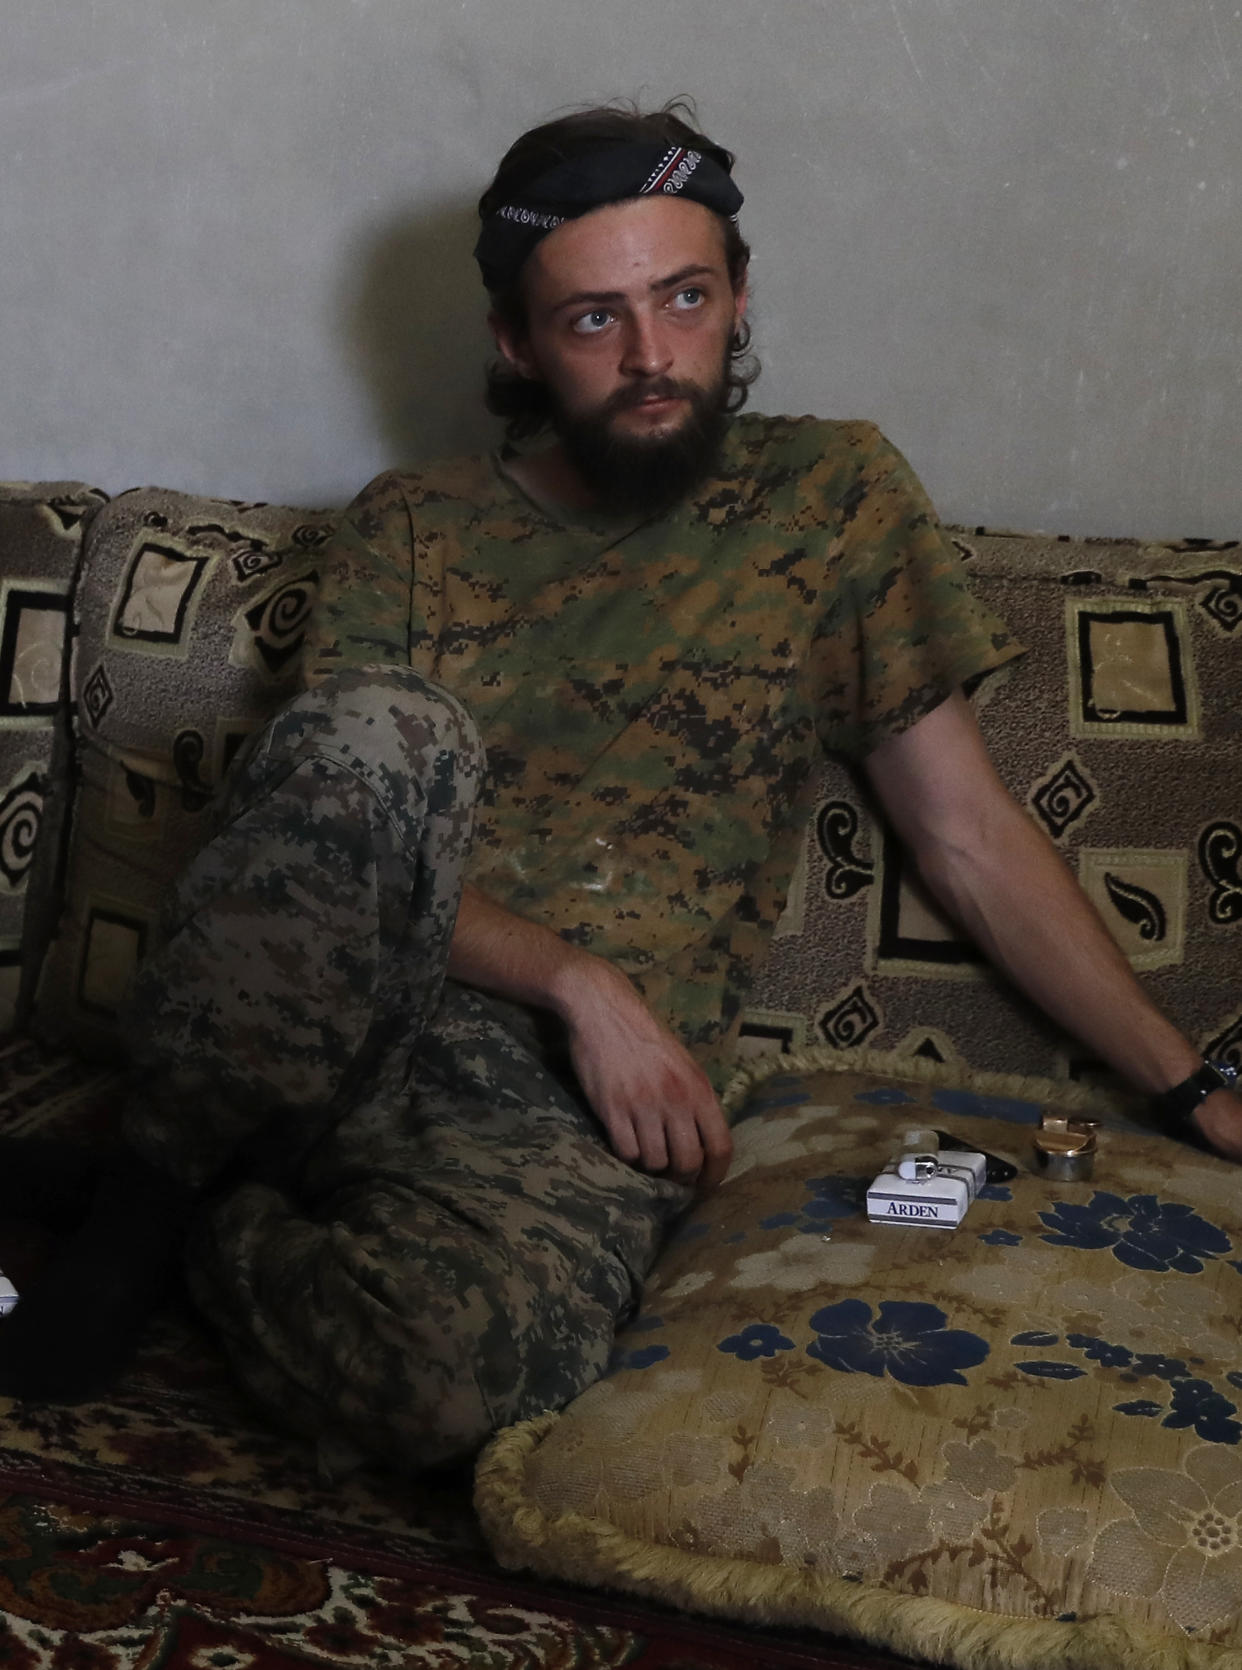 Jac Holmes had no previous military experience but went to fight against Isis in Syria aged 21. He died in October 2017 in the recently liberated city of Raqqa (AP Photo/Hussein Malla)